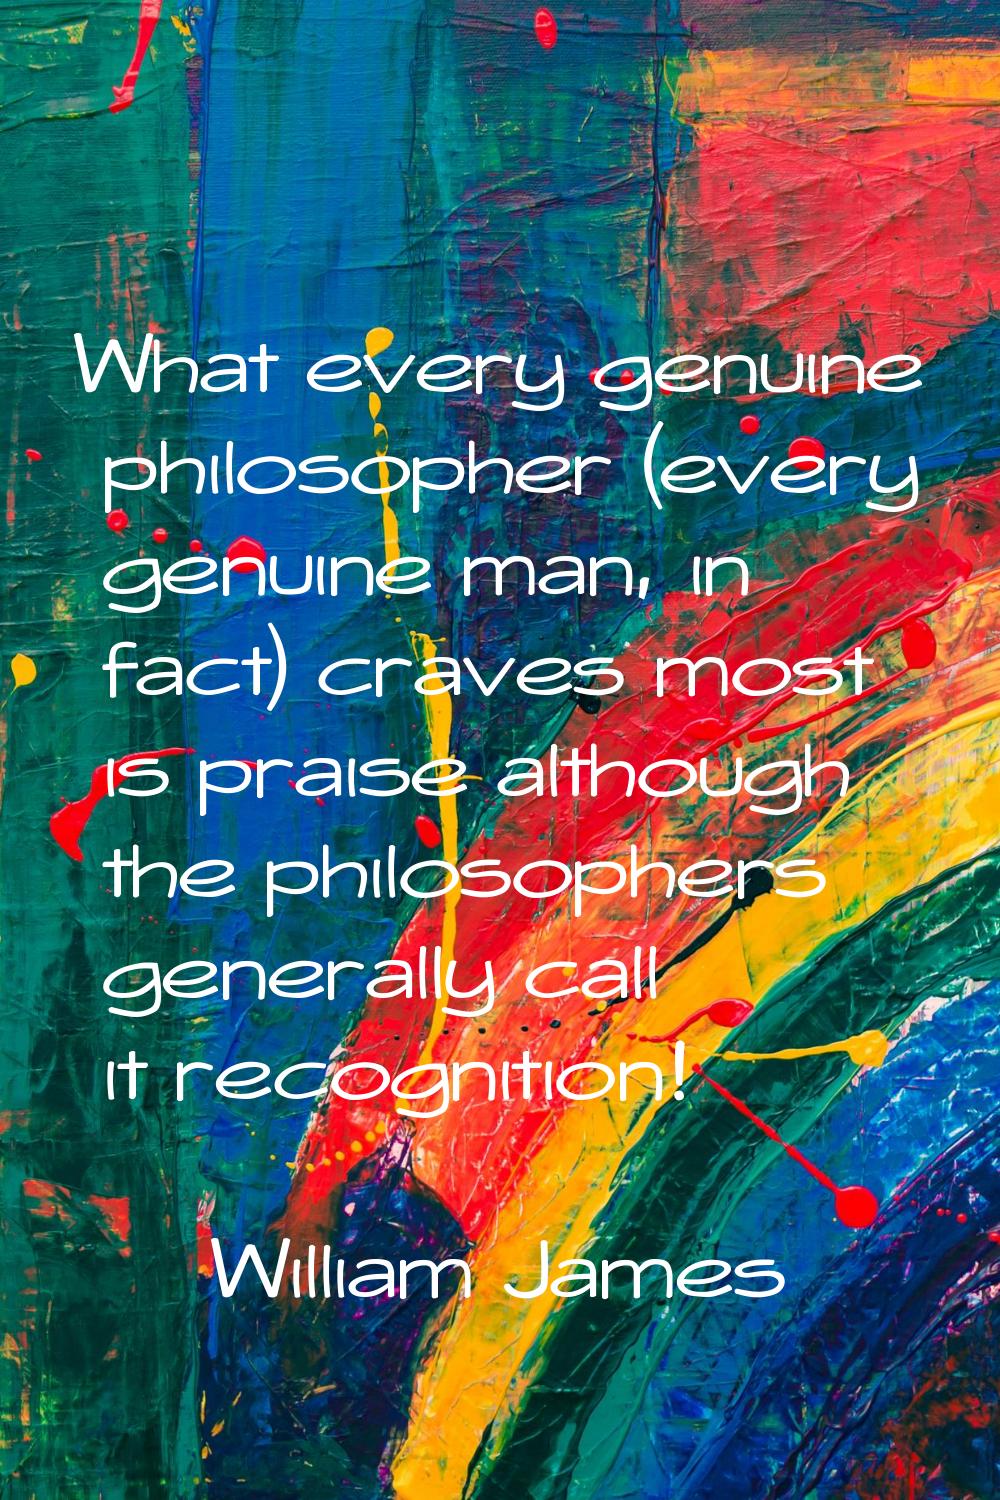 What every genuine philosopher (every genuine man, in fact) craves most is praise although the phil